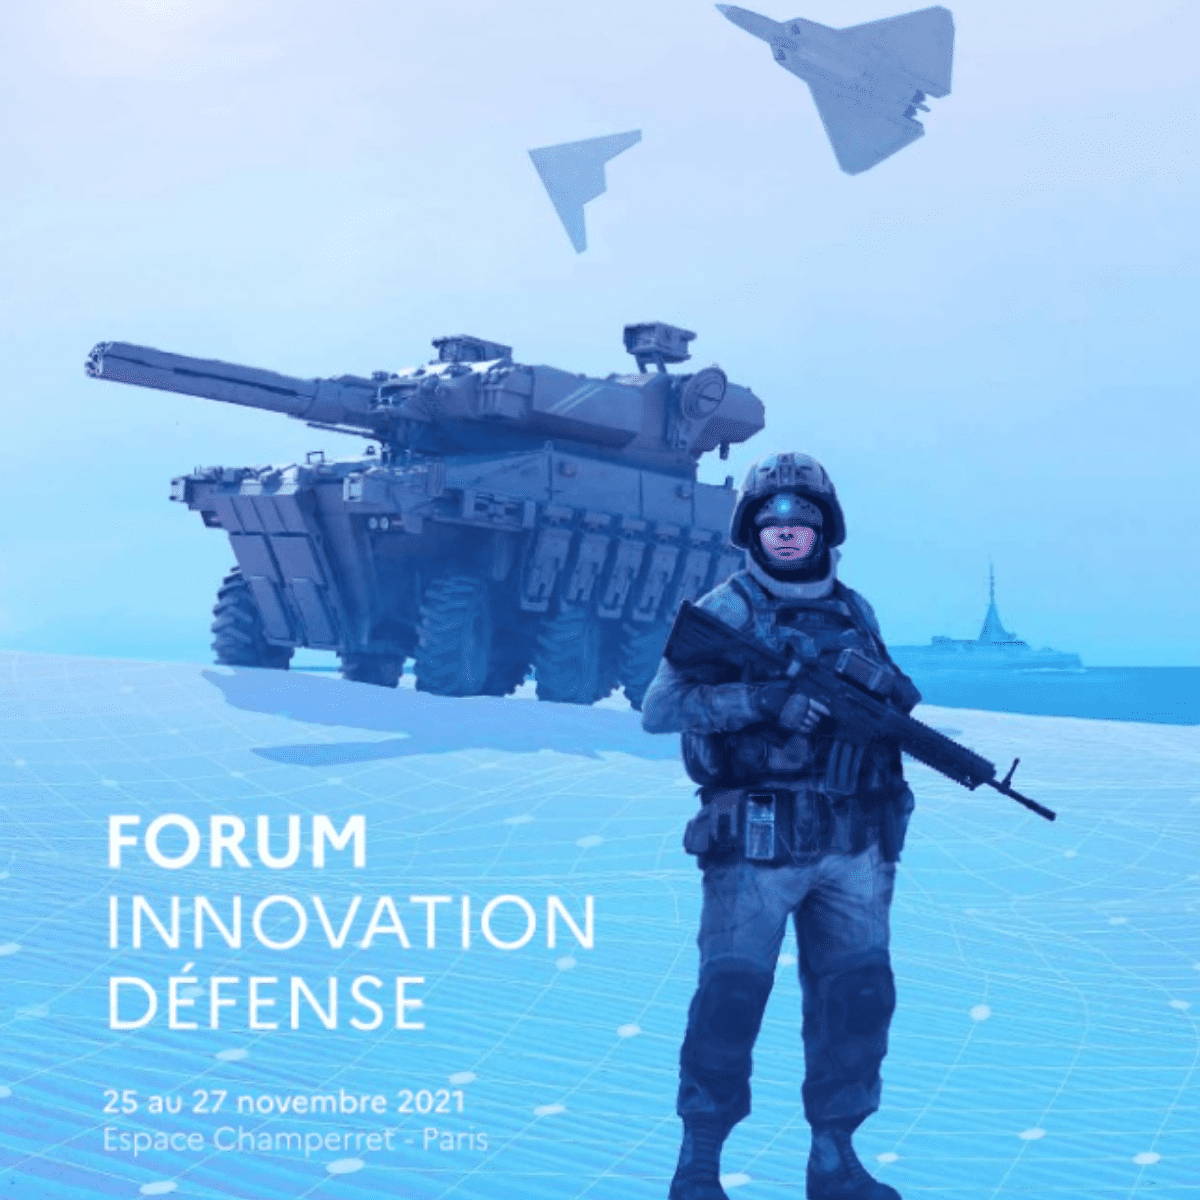 Innovation for paint aircraft and naval A forum organized by Agnecy Innovation Defence and the army